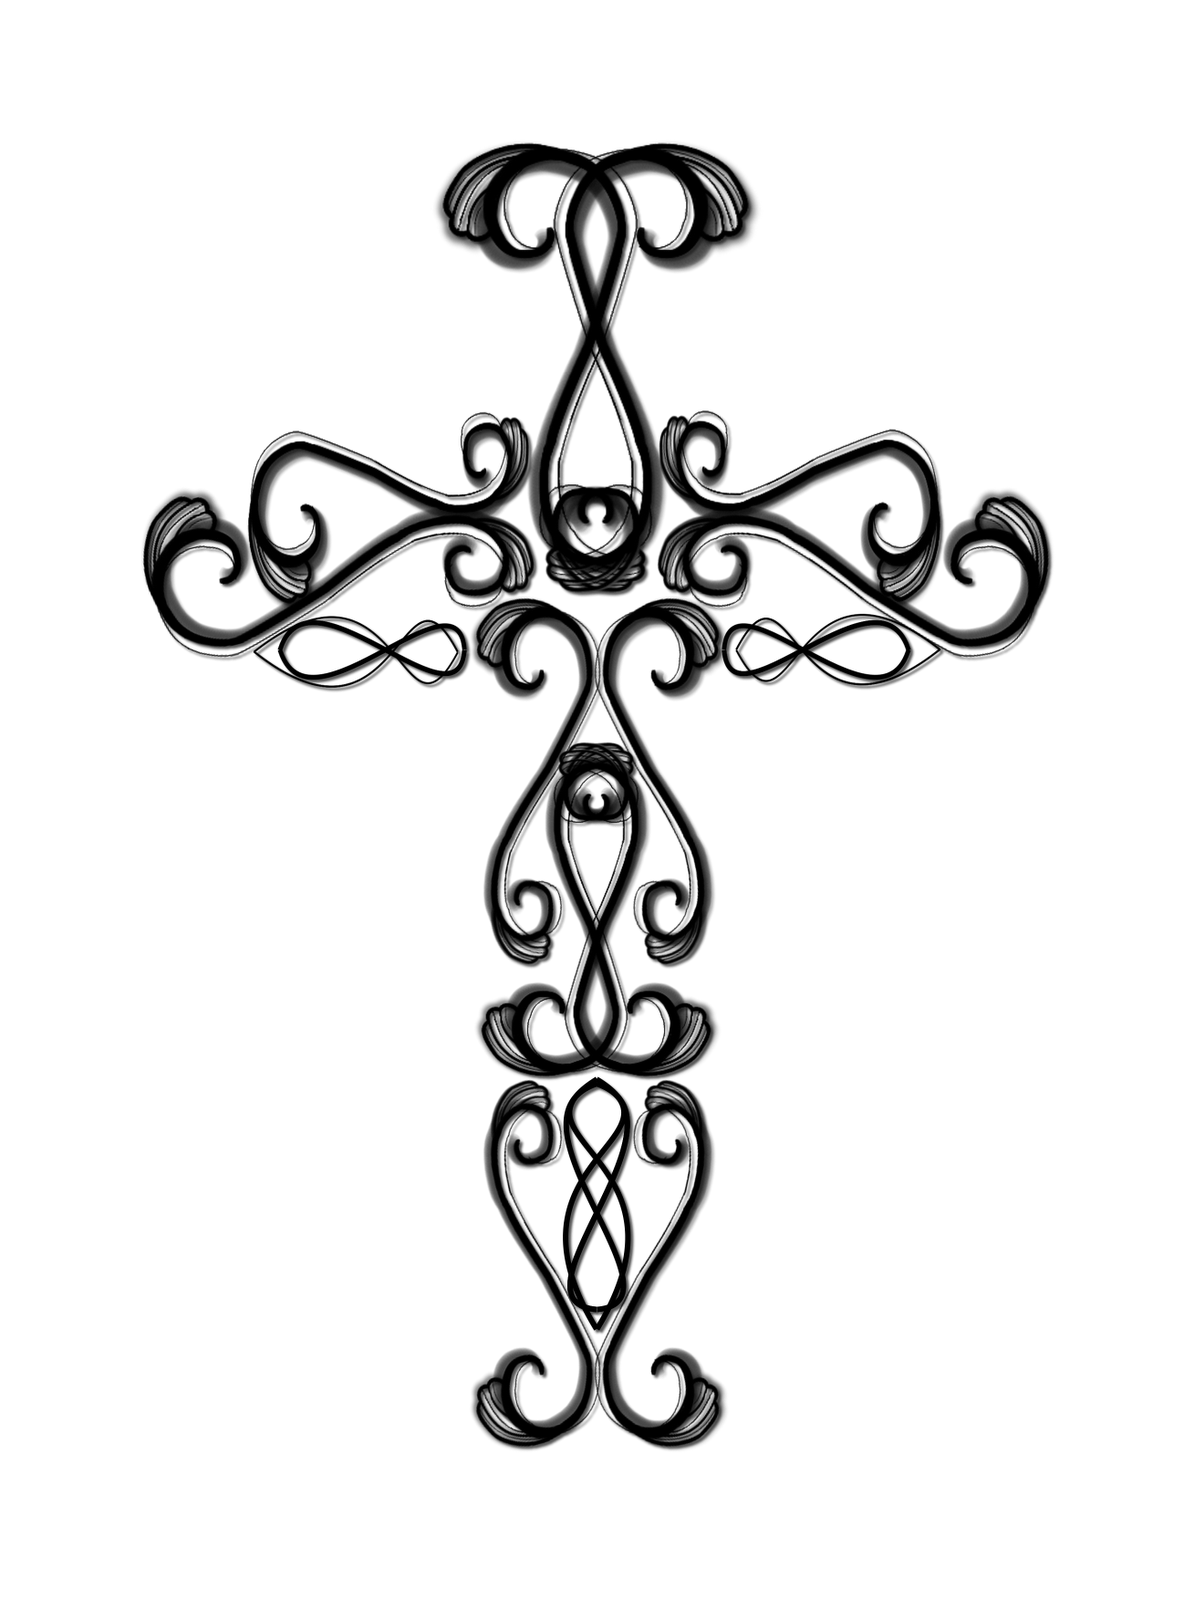 Catholic Cross Drawing - Free Clipart Images